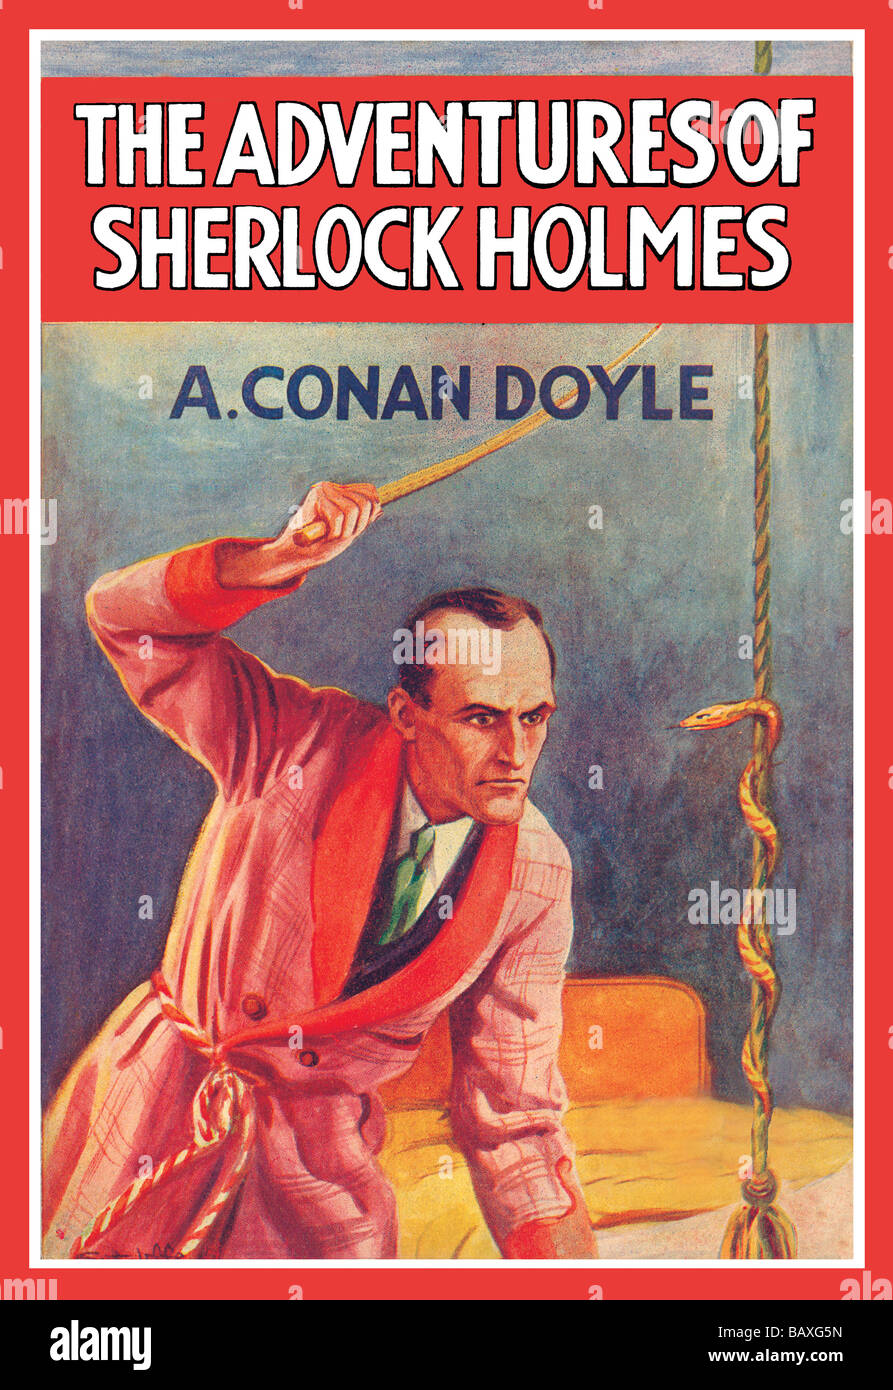 The Adventures of Sherlock Holmes #2 (book cover) Stock Photo